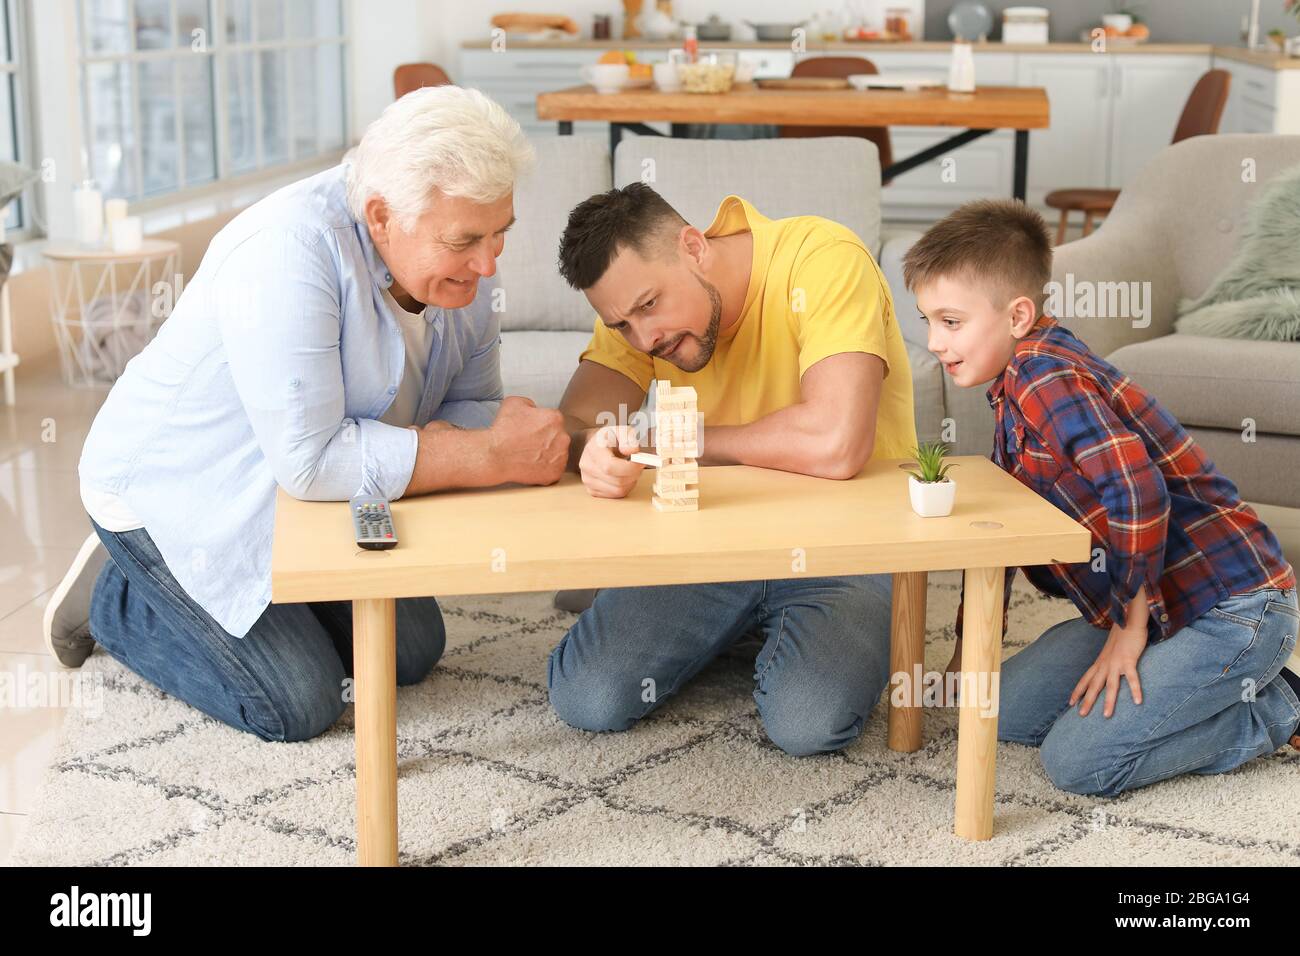 Man with his father and son spending time together at home Stock Photo